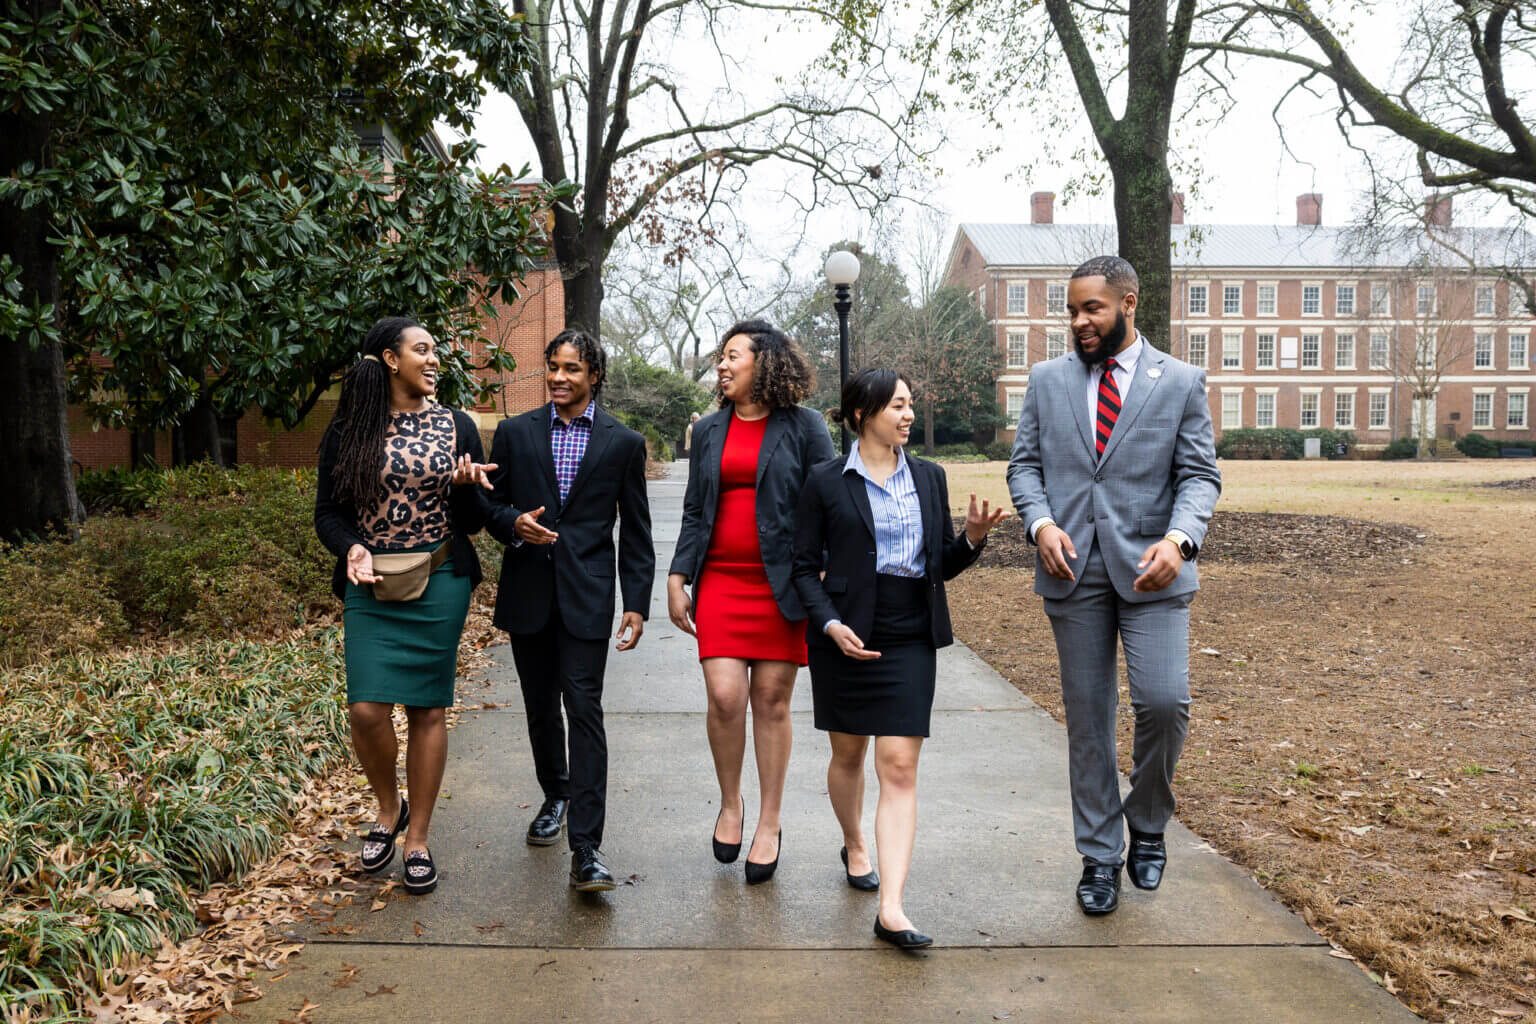 Kimata Thomas, Nicholas Myers, Jamye Thigpen, Rosalba Mazzotta, and Eric Okanume (from left to right) make up the advisory board for the Peach State Louis Stokes Alliance for Minority Participation. Since its launch in 2006, some 1,300 STEM students of color at the University of Georgia have benefited from the program. (Photo by Chamberlain Smith/UGA)